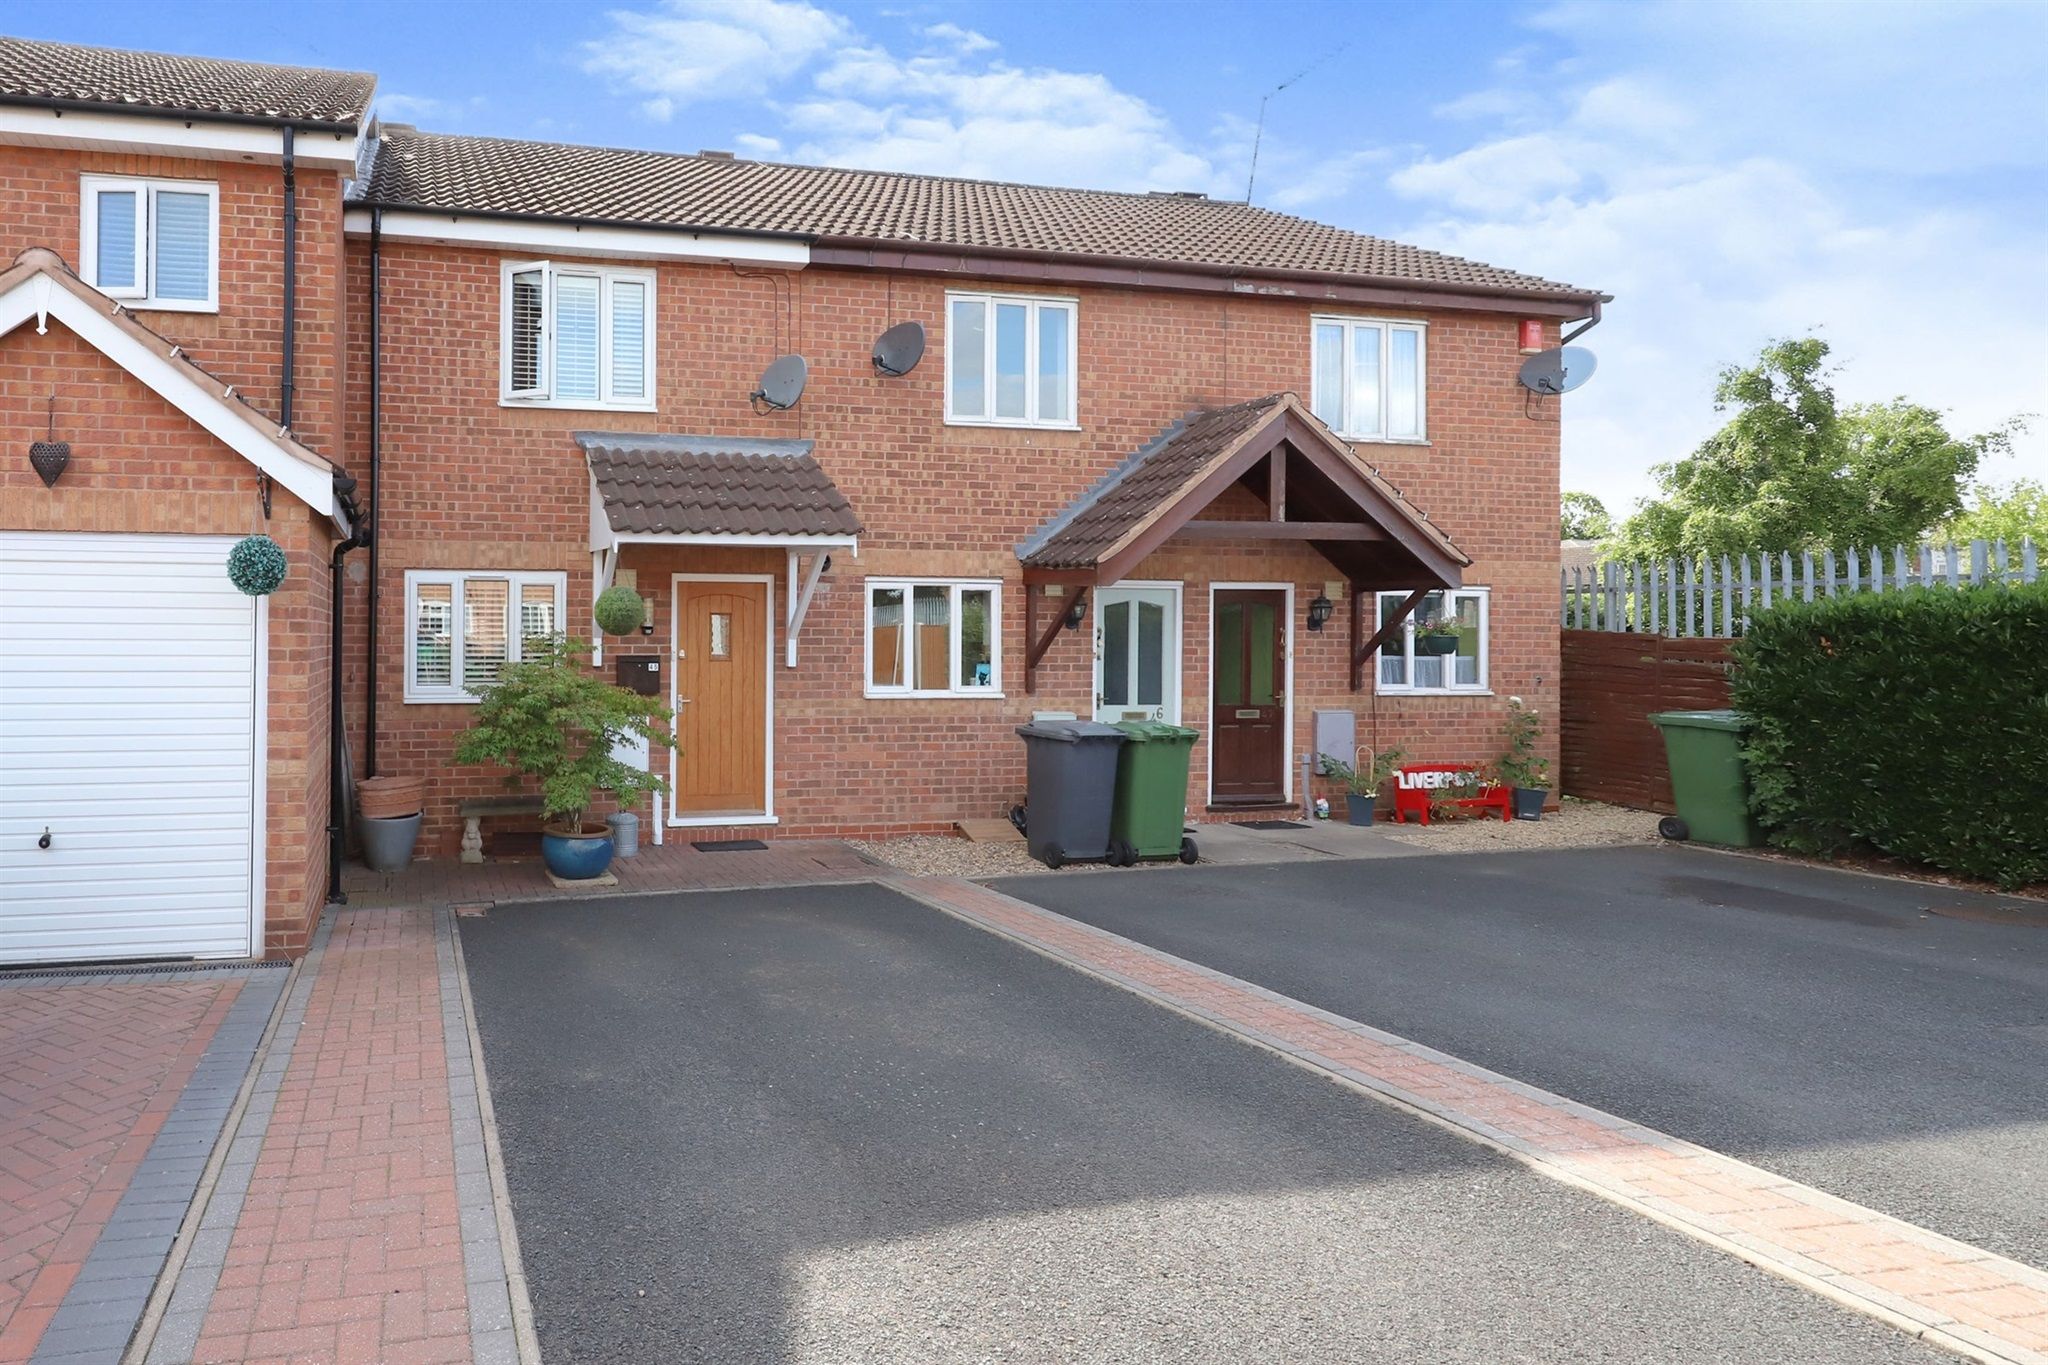 2 bed terraced house for sale in Tabbs Gardens, Kidderminster DY10 - Zoopla